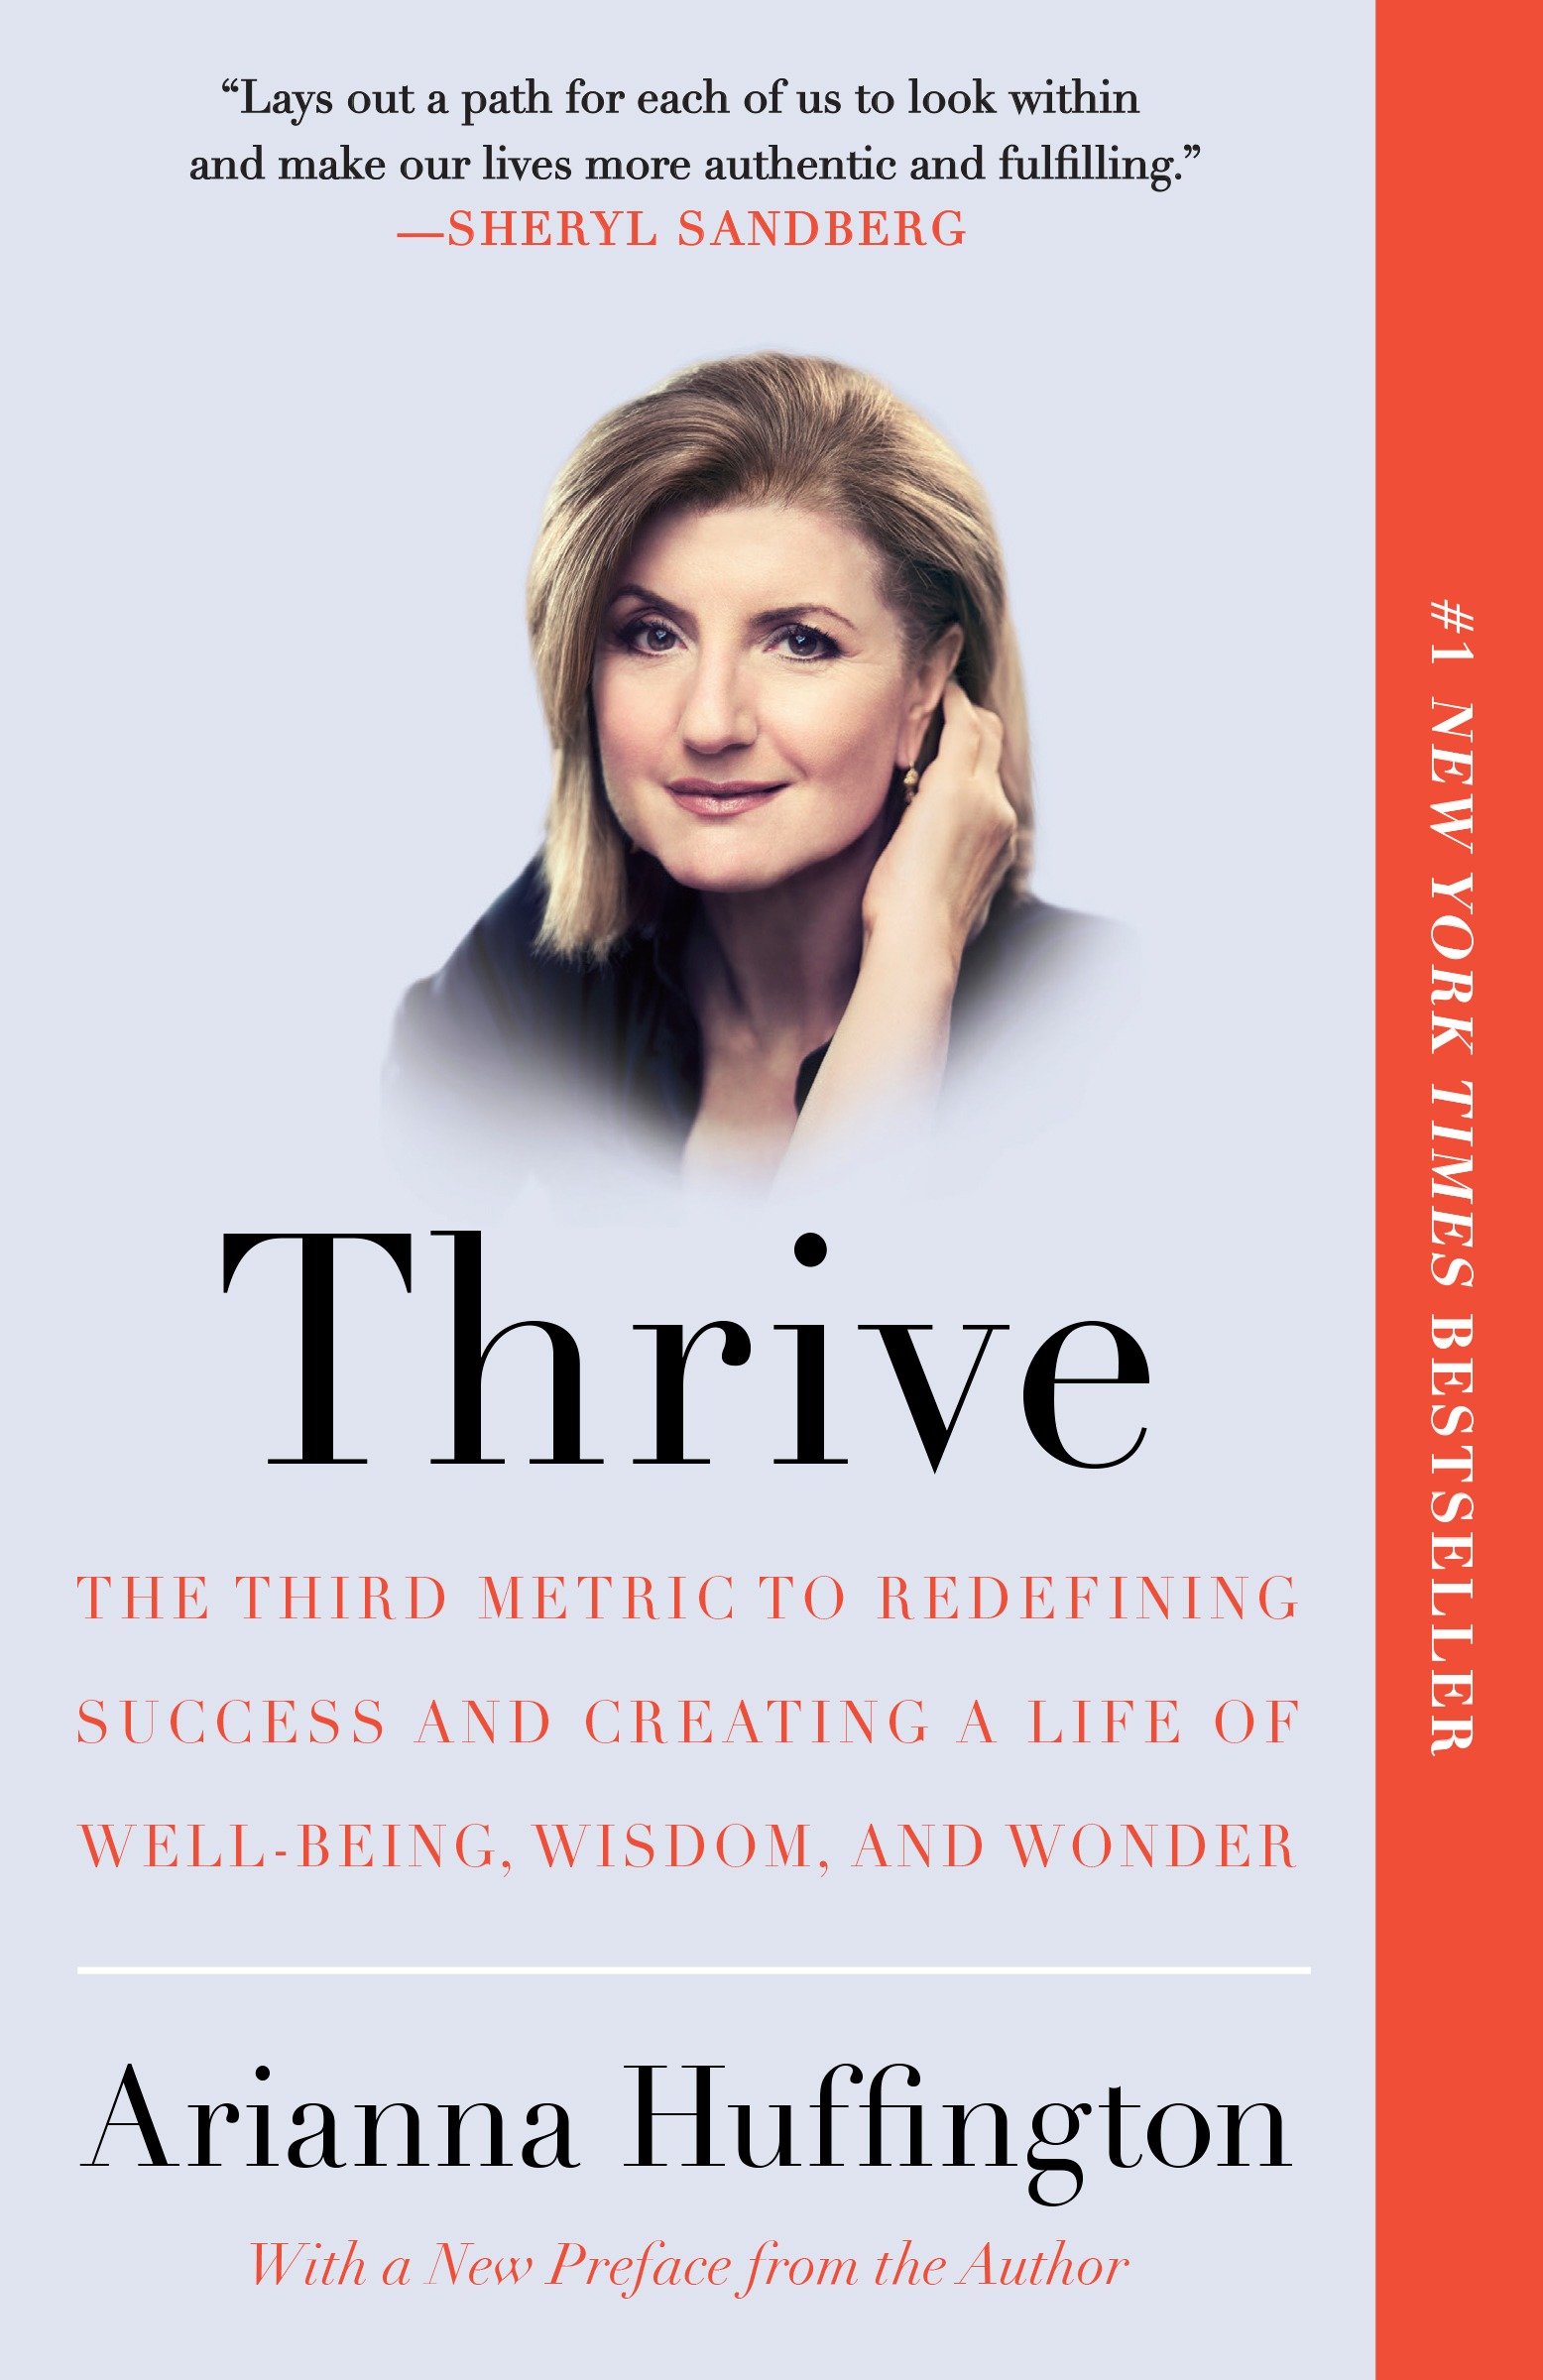 Umschlagbild für Thrive [electronic resource] : The Third Metric to Redefining Success and Creating a Life of Well-Being, Wisdom, and Wonder